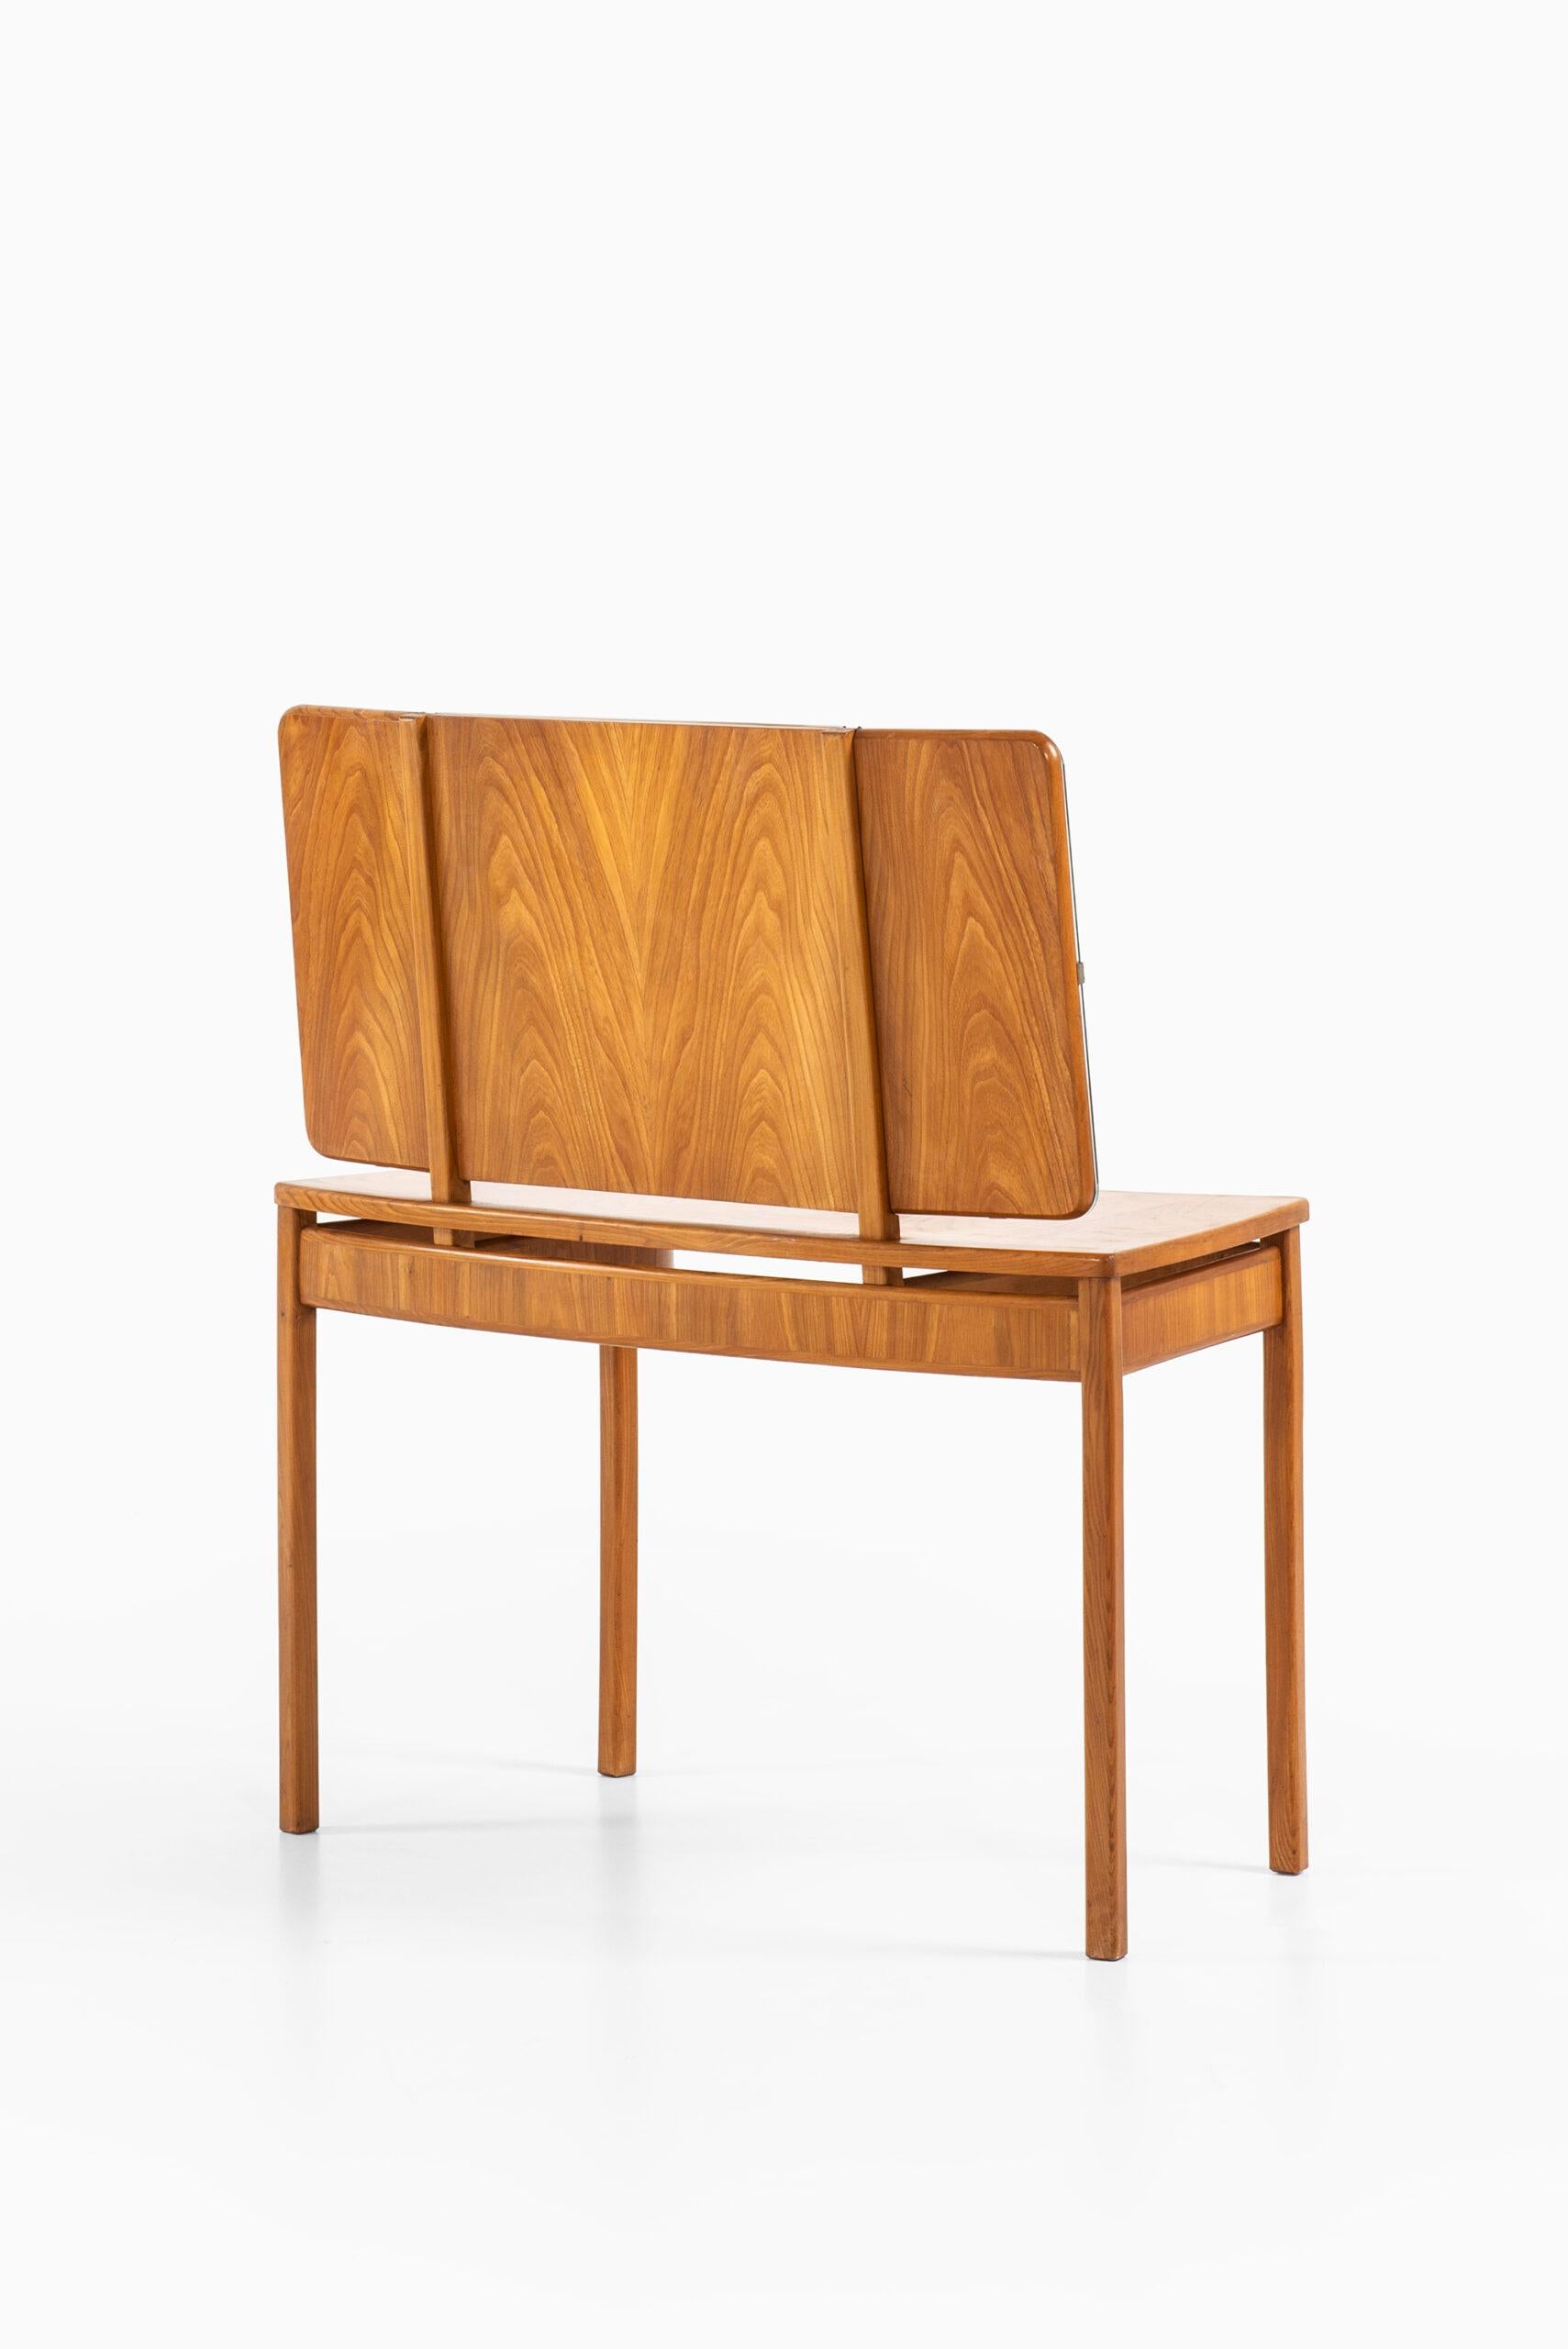 Mid-20th Century Carl-Johan Boman Vanity Produced by Boman Oy in Finland For Sale